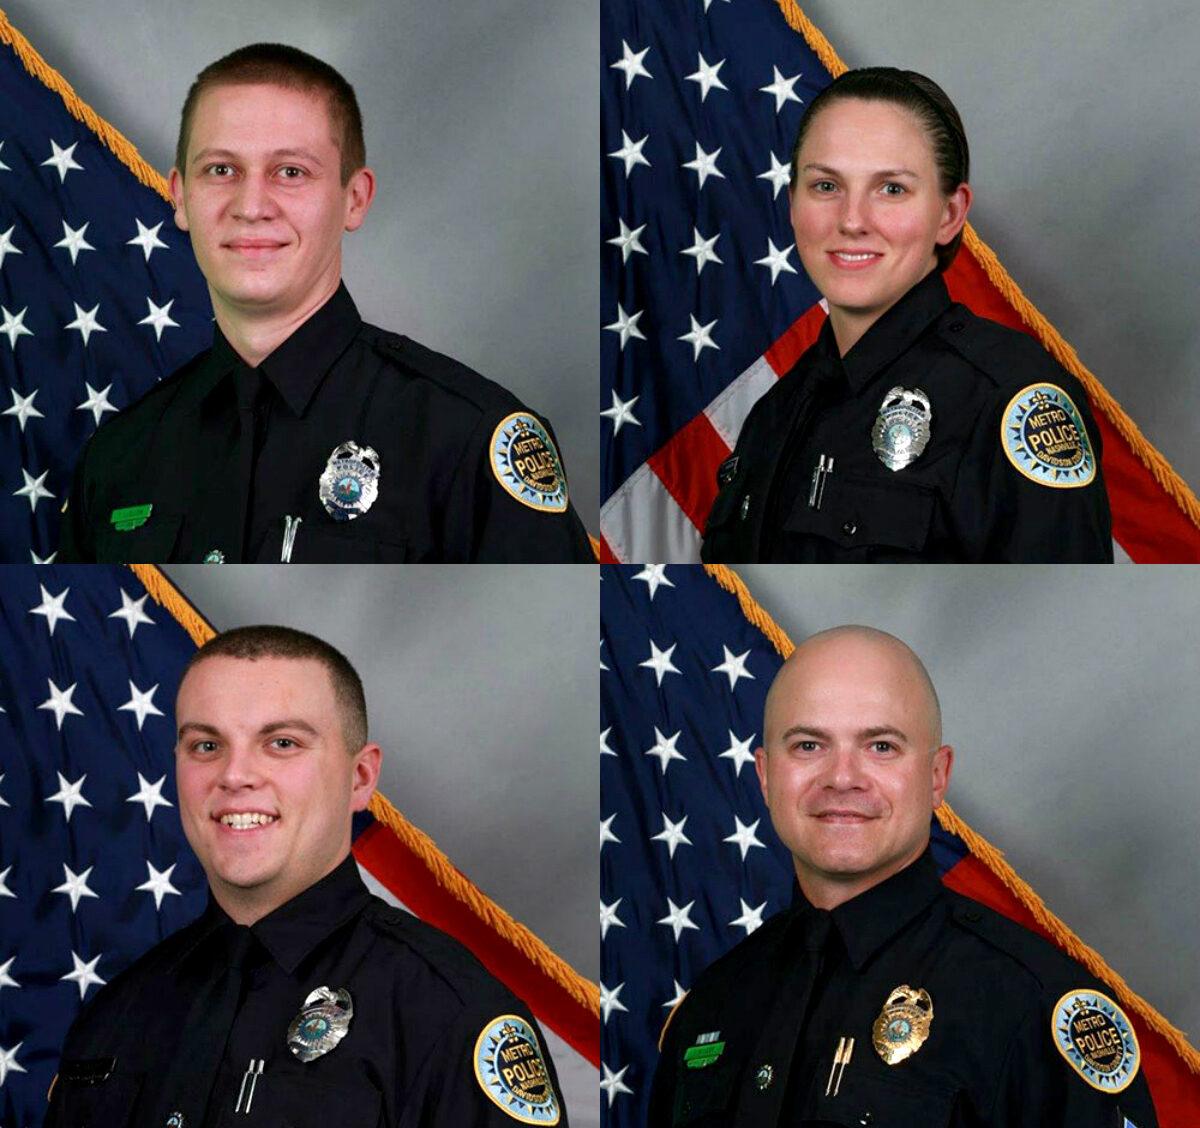 From top left clockwise, Nashville police officers Richard Tylor Luellen, Amanda Topping, Sgt. Timothy Miller, and Michael Sipos were among a group of six who were credited with helping save lives before a Christmas Day explosion. (Courtesy of the Nashville Police Department)